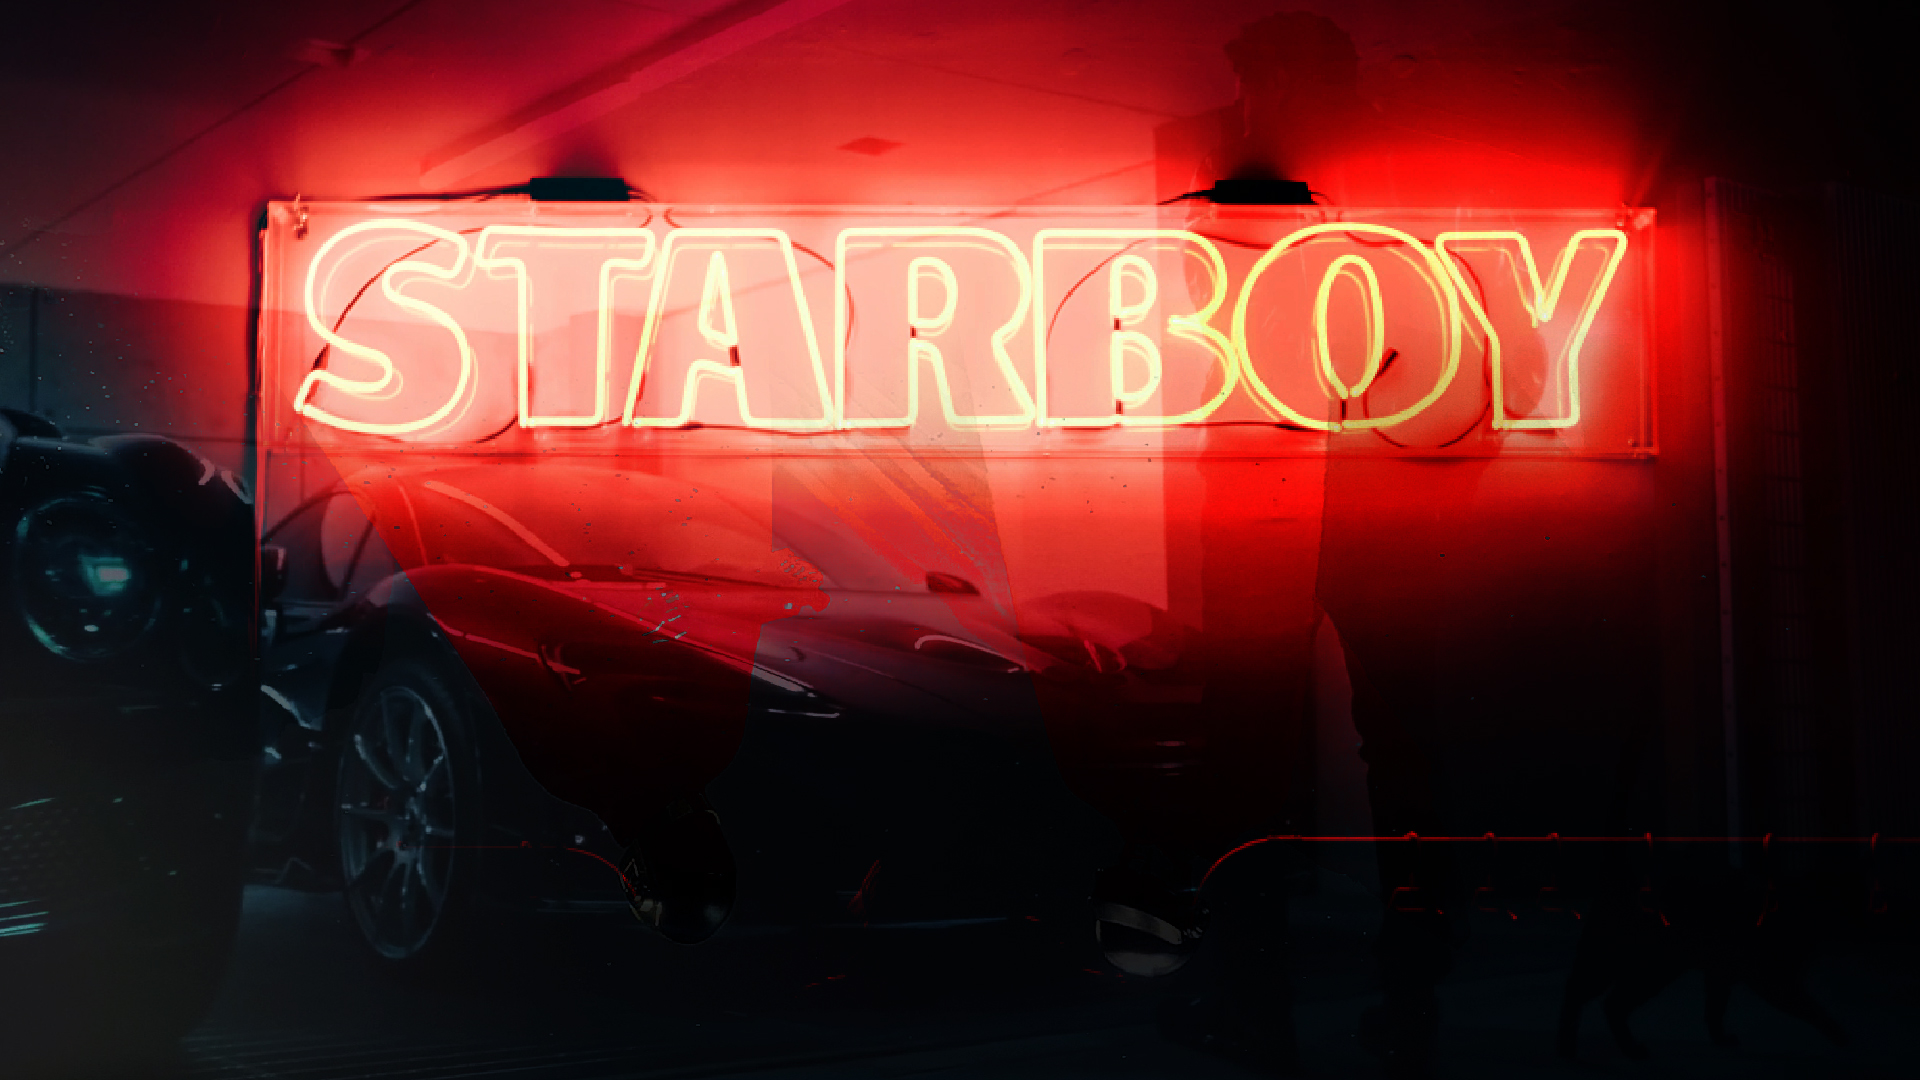 Starboy Wallpapers